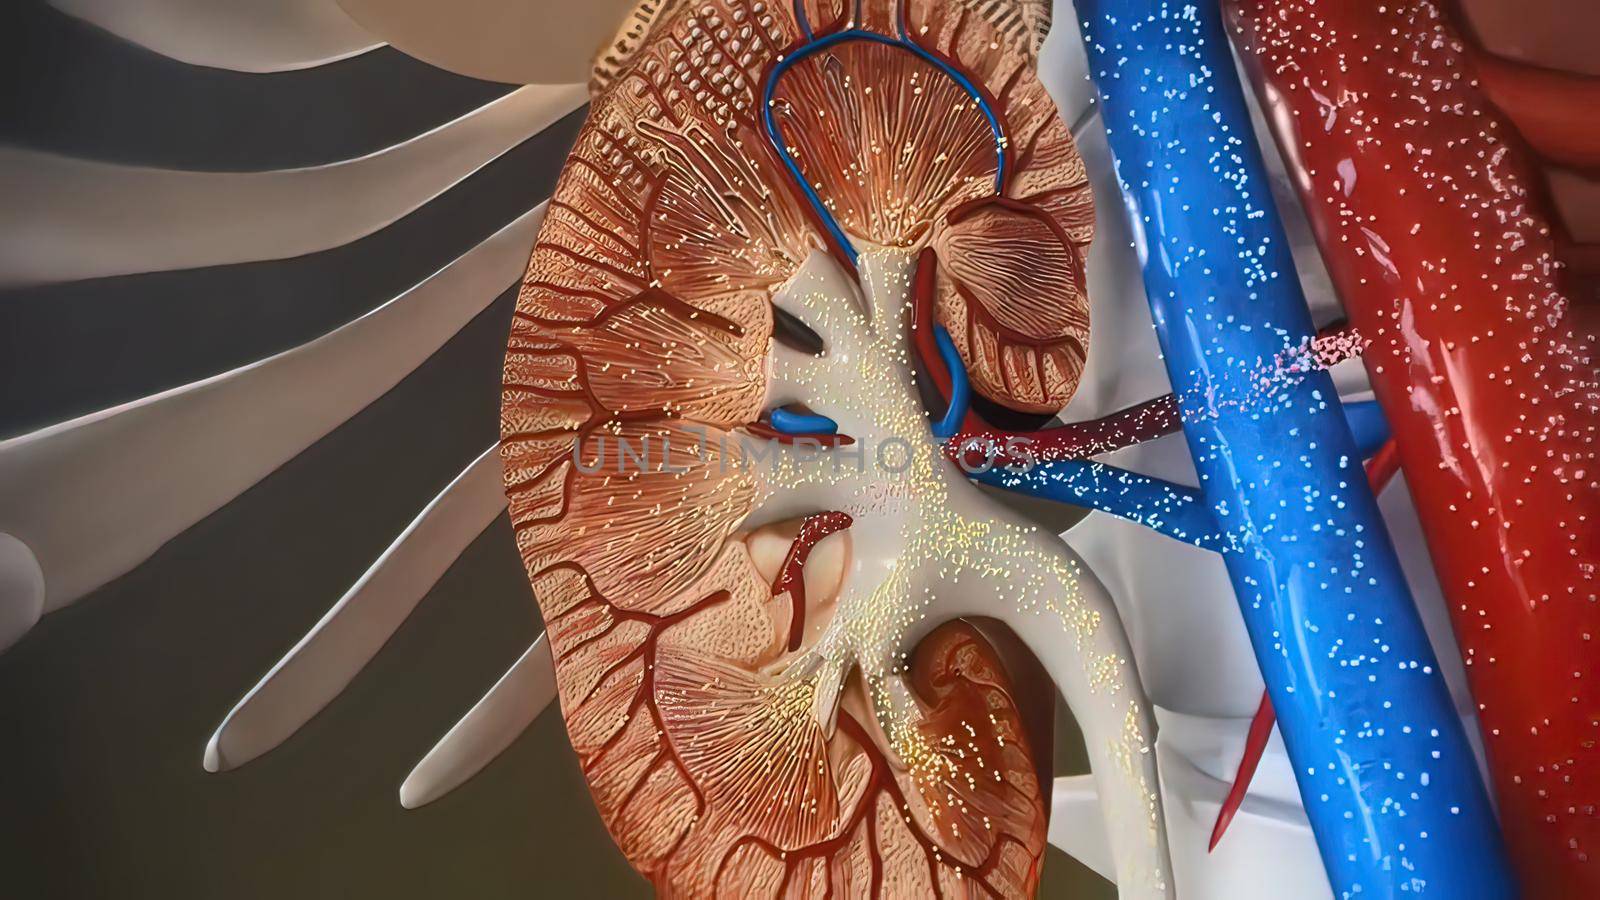 The renal circulation supplies the blood to the kidneys via the renal arteries, left and right, which branch directly from the abdominal aorta. 3D illustration